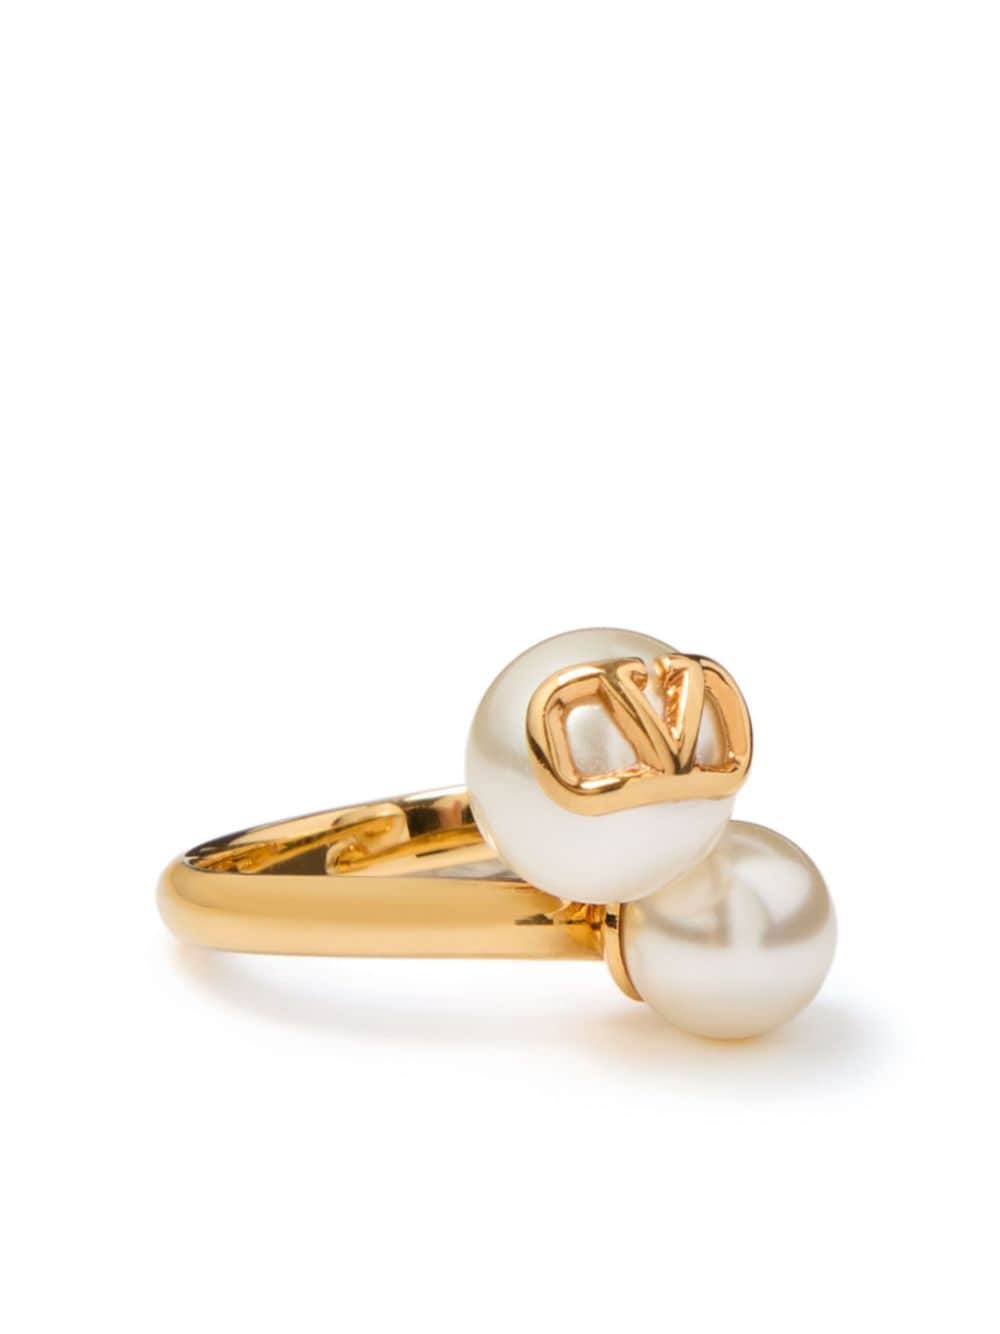 VLogo Signature faux-pearl ring